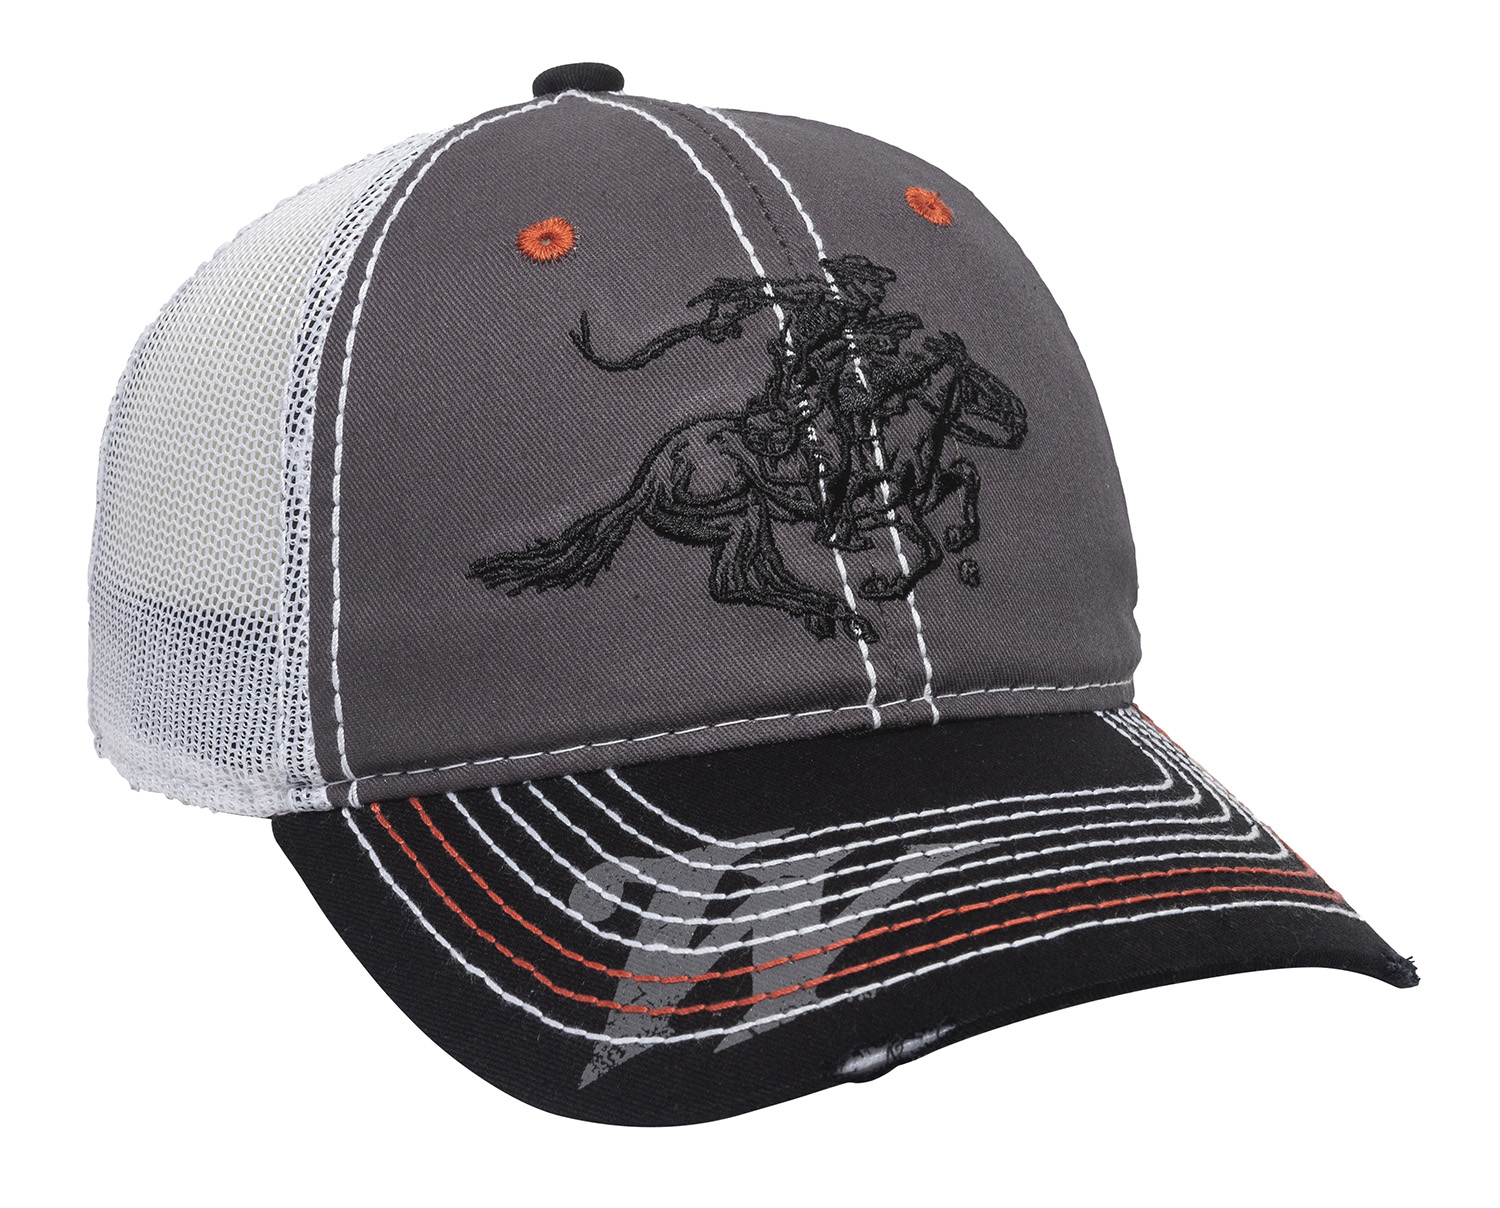 Outdoor Cap WIN35B Winchester Cap Cotton Twill Black/Charcoal/White Unstructured OSFA